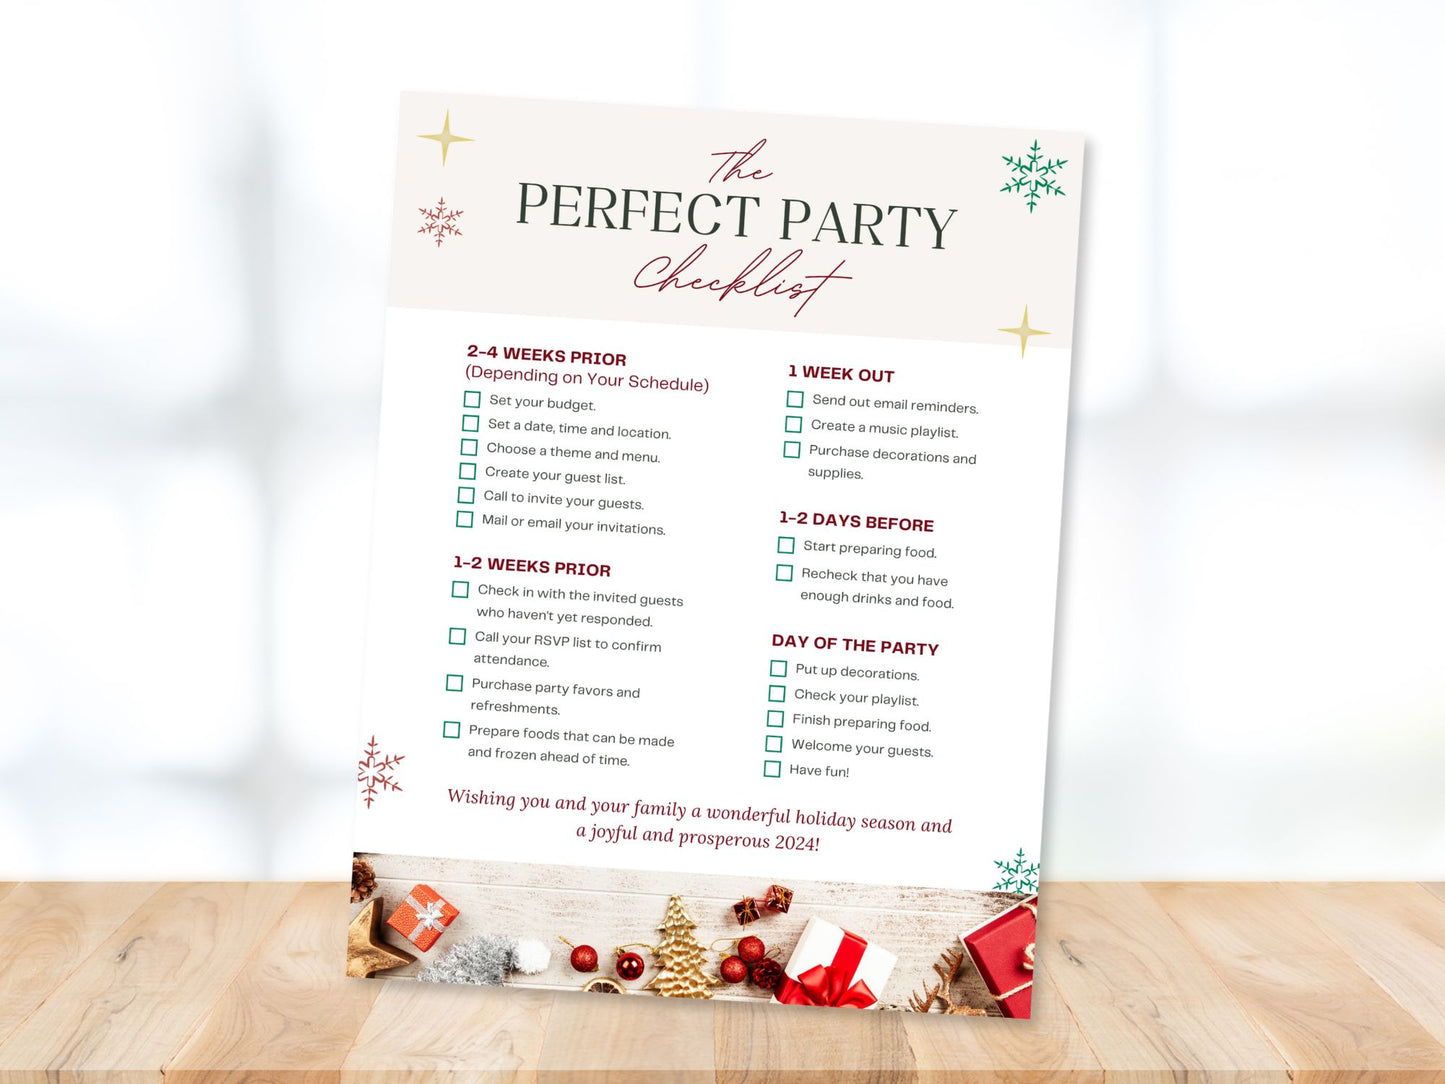 Christmas Holiday Newsletter - Elevate your marketing with festive tips. 'The Perfect Party Checklist' and 'Holiday Season Party Ideas' pages engage clients in holiday spirit, making this season memorable.